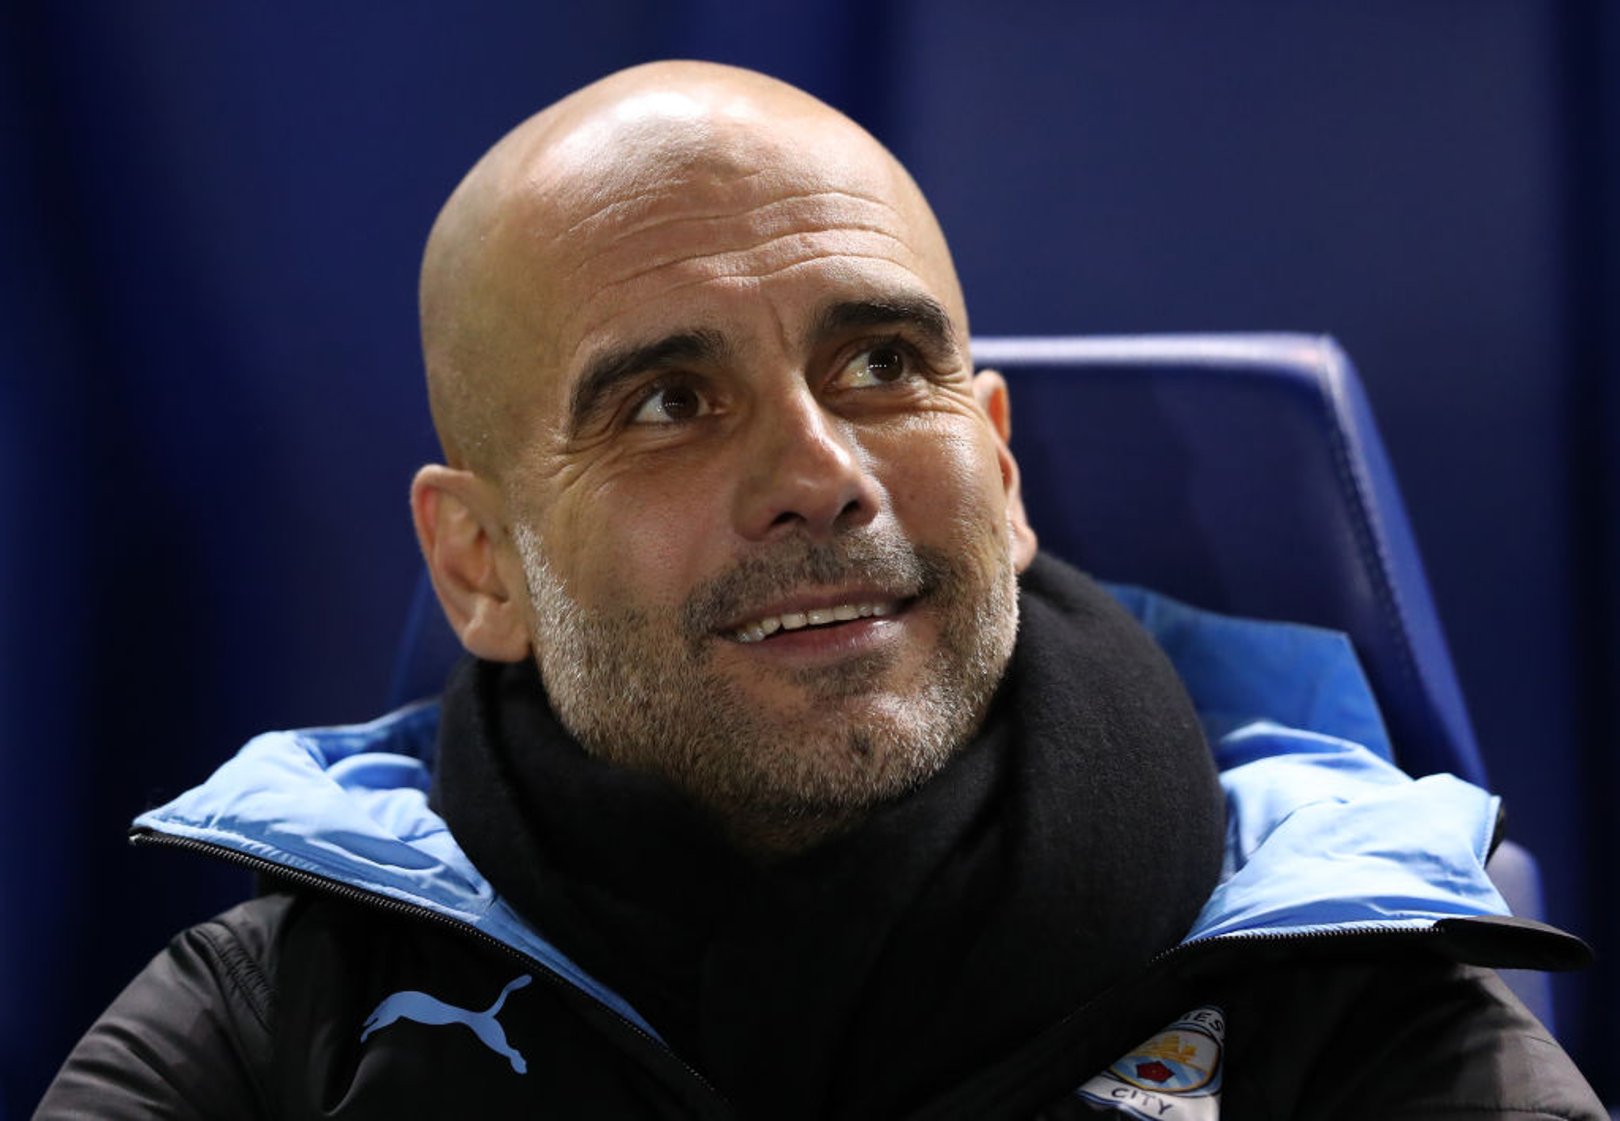 Guardiola: Cup competitions our focus